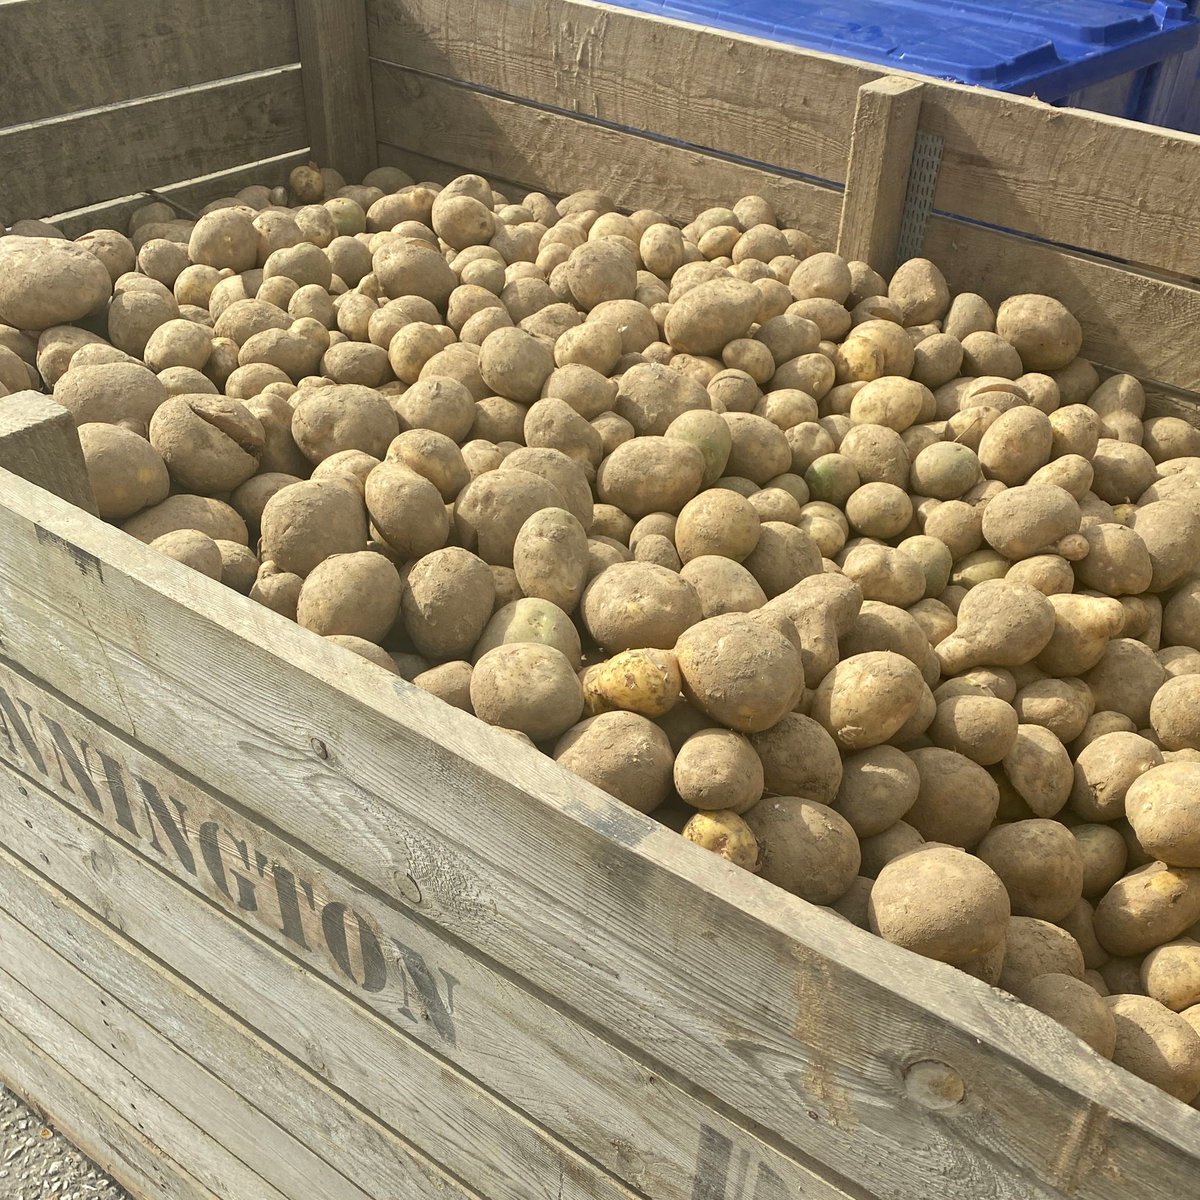 We are hugely grateful to Tom and Mapsons Farm for their ongoing support! So far this year they have donated over 7 tonnes of potatoes - that's a lot of jackets! 

#stopfoodwaste #fightagainstfoodwaste #zerowaste #keepoutoflandfill #foodwaste #foodrescue #environment #charity